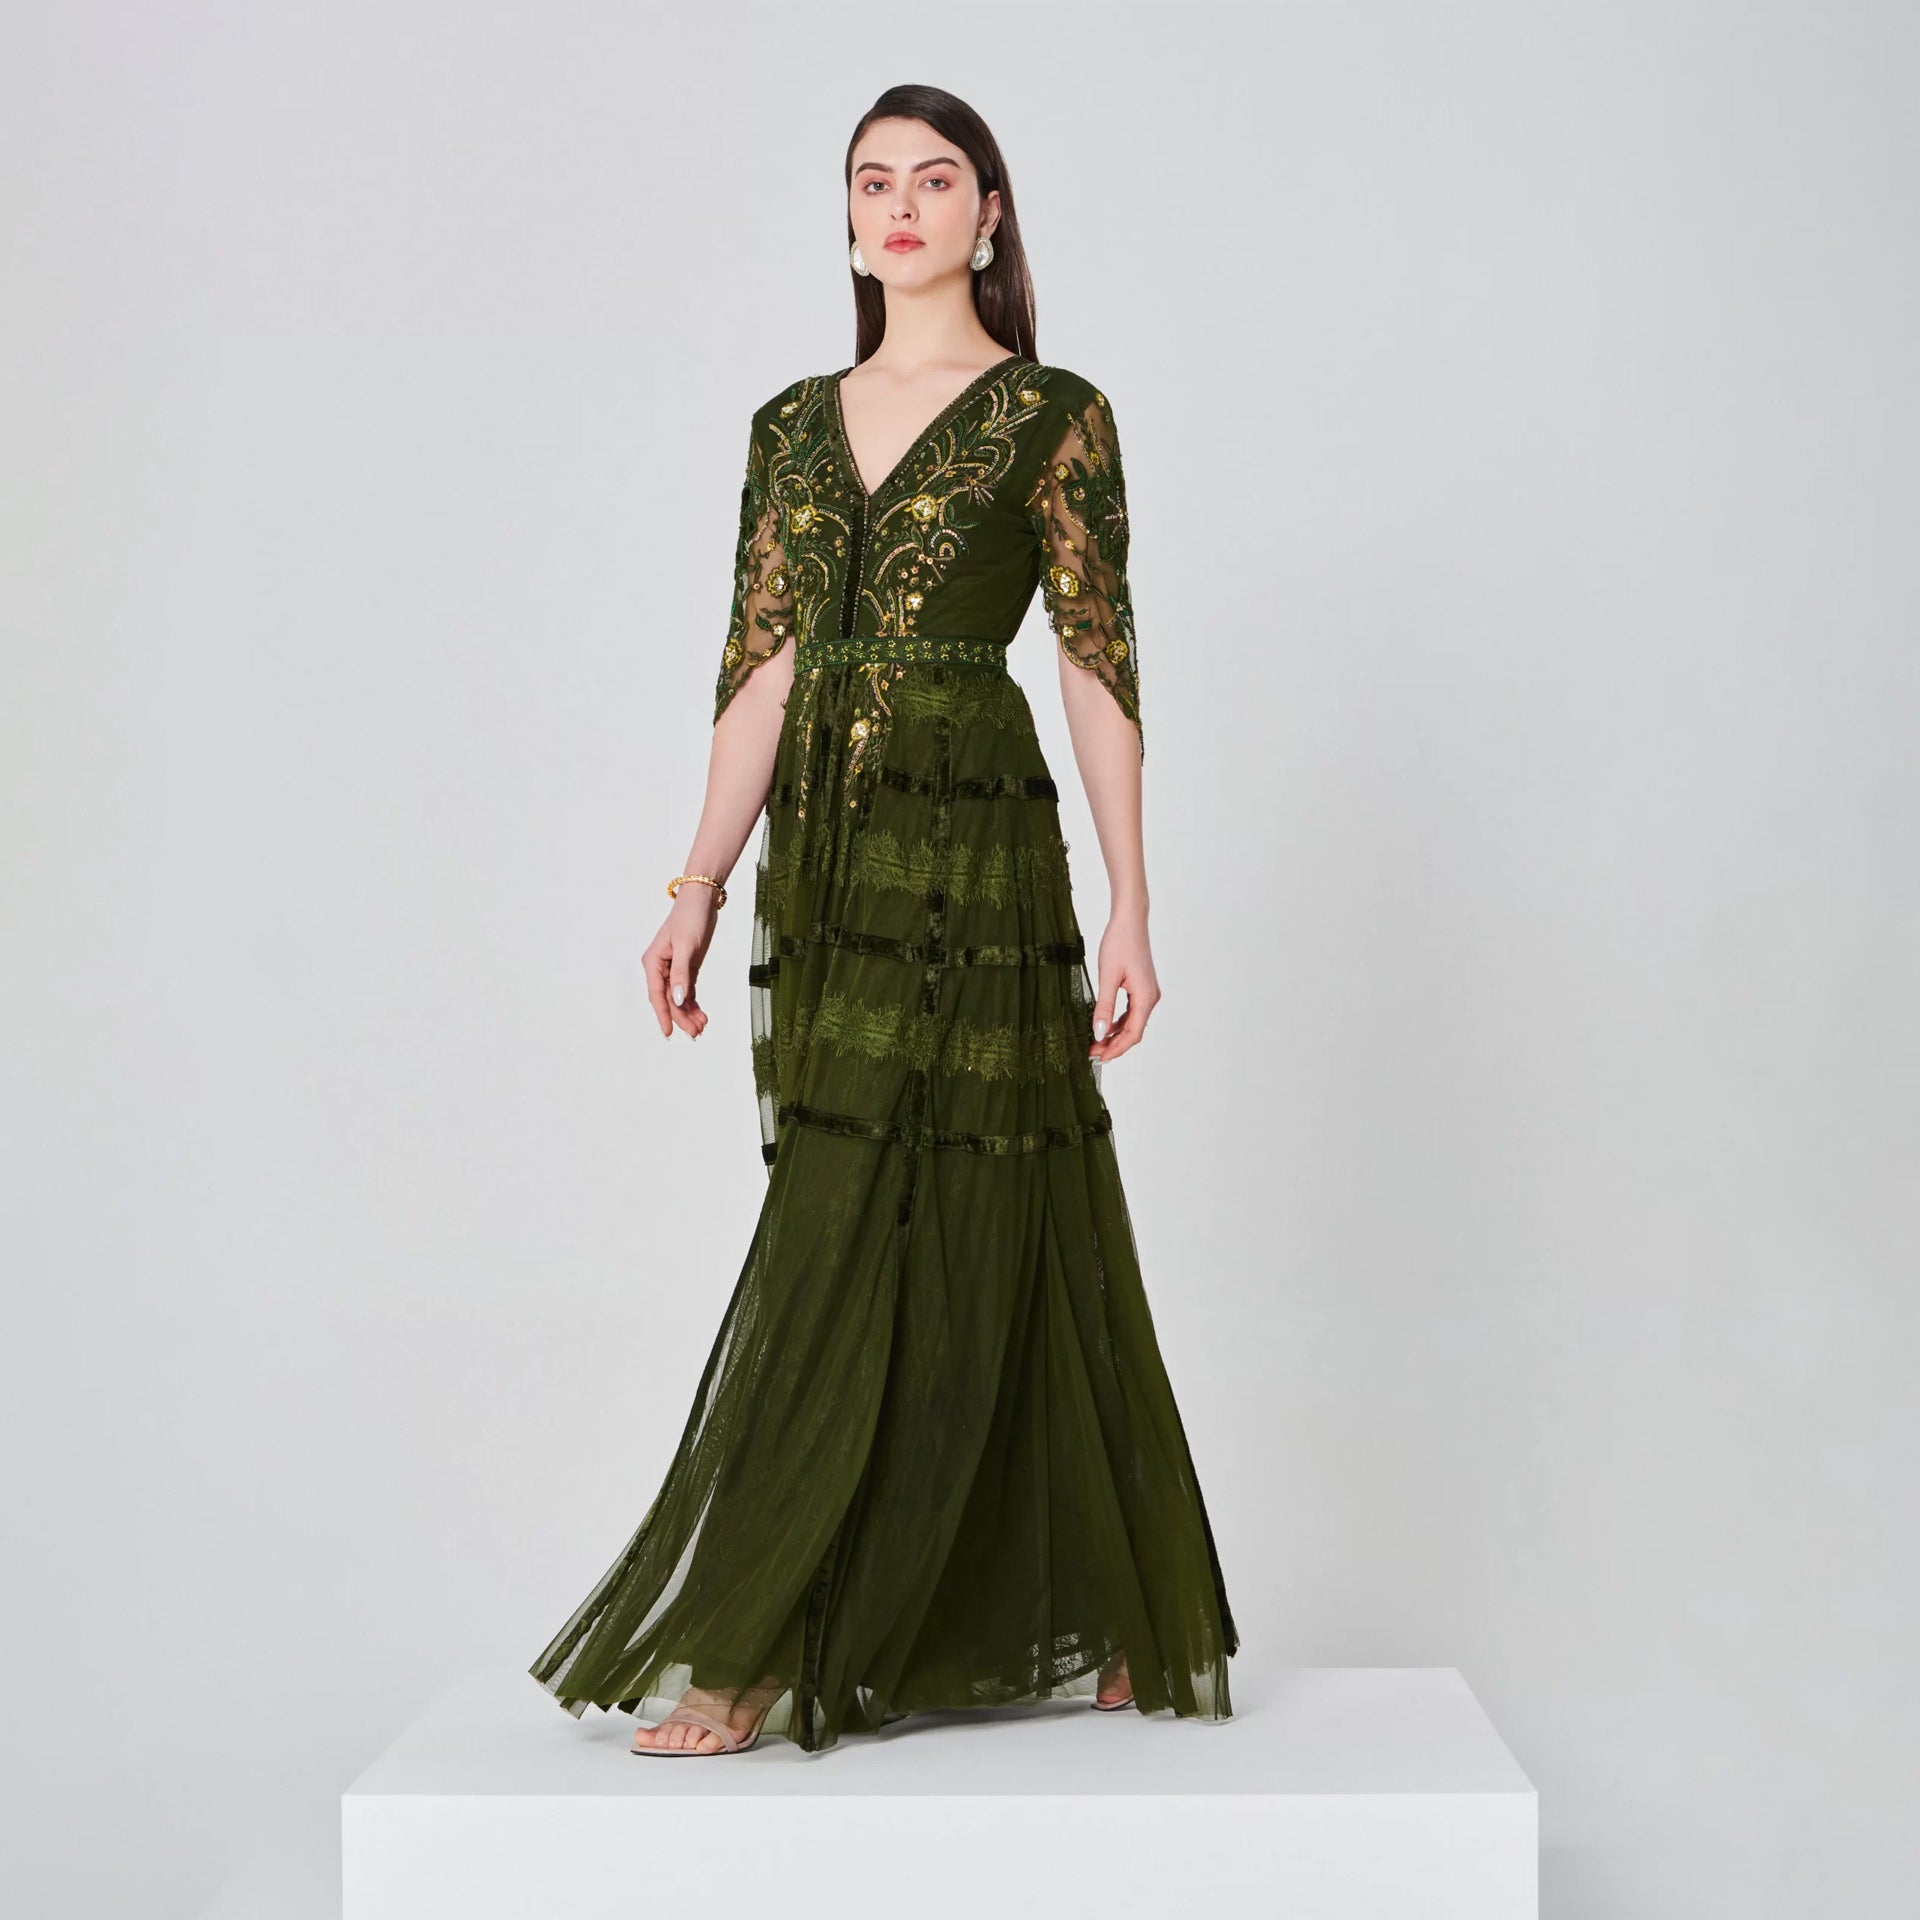 Olive Green Tulip Dress With Short Sleeves And Gold Embroidery From Shalky